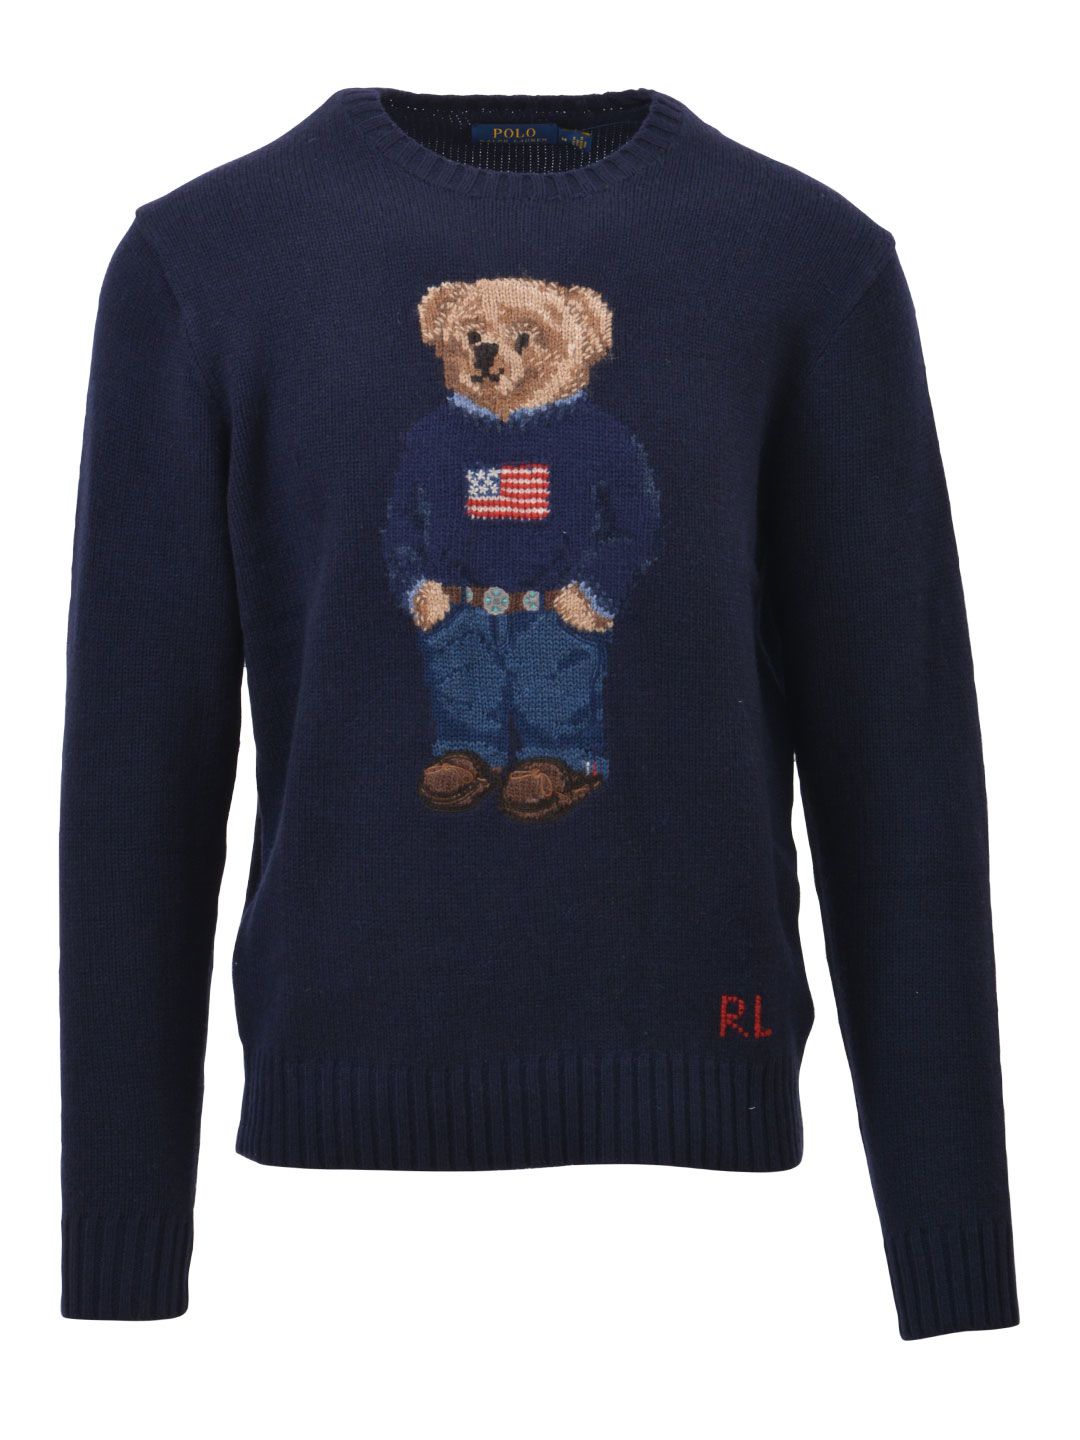 Polo Ralph Lauren Mens Big And Tall Iconic Polo Bear Sweater Navy Modesens